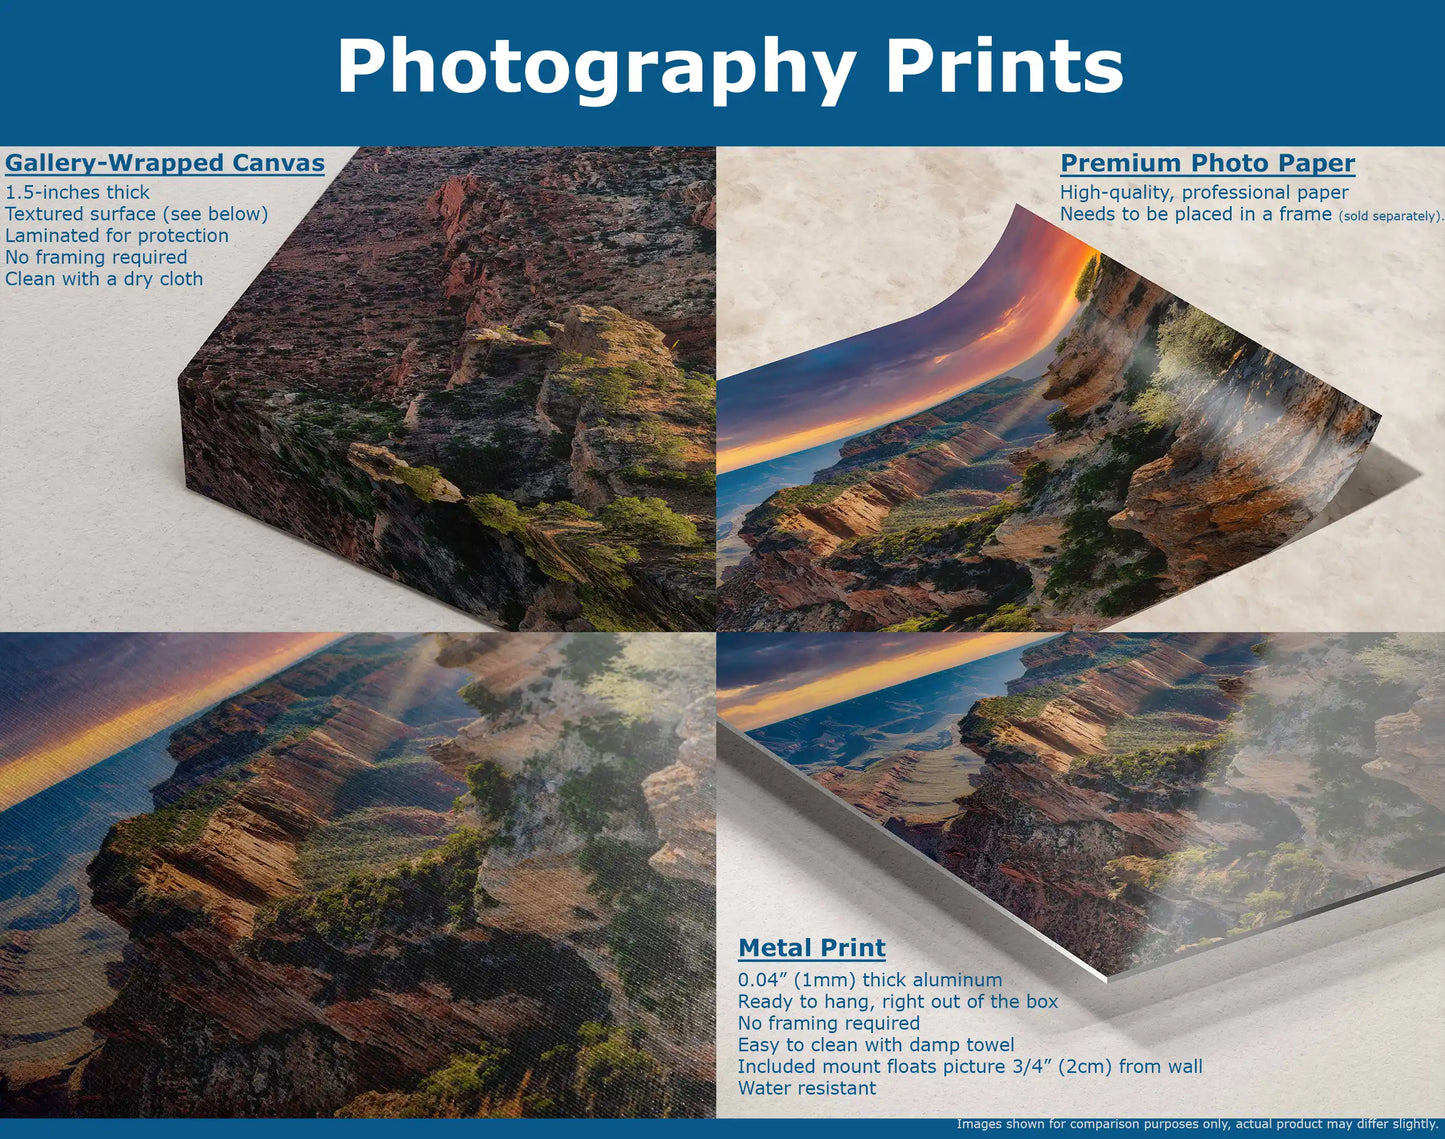 Cape Royal of Grand Canyon Sunset Wall Decor is available on gallery-wrapped canvas, premium photo paper, aluminum metal